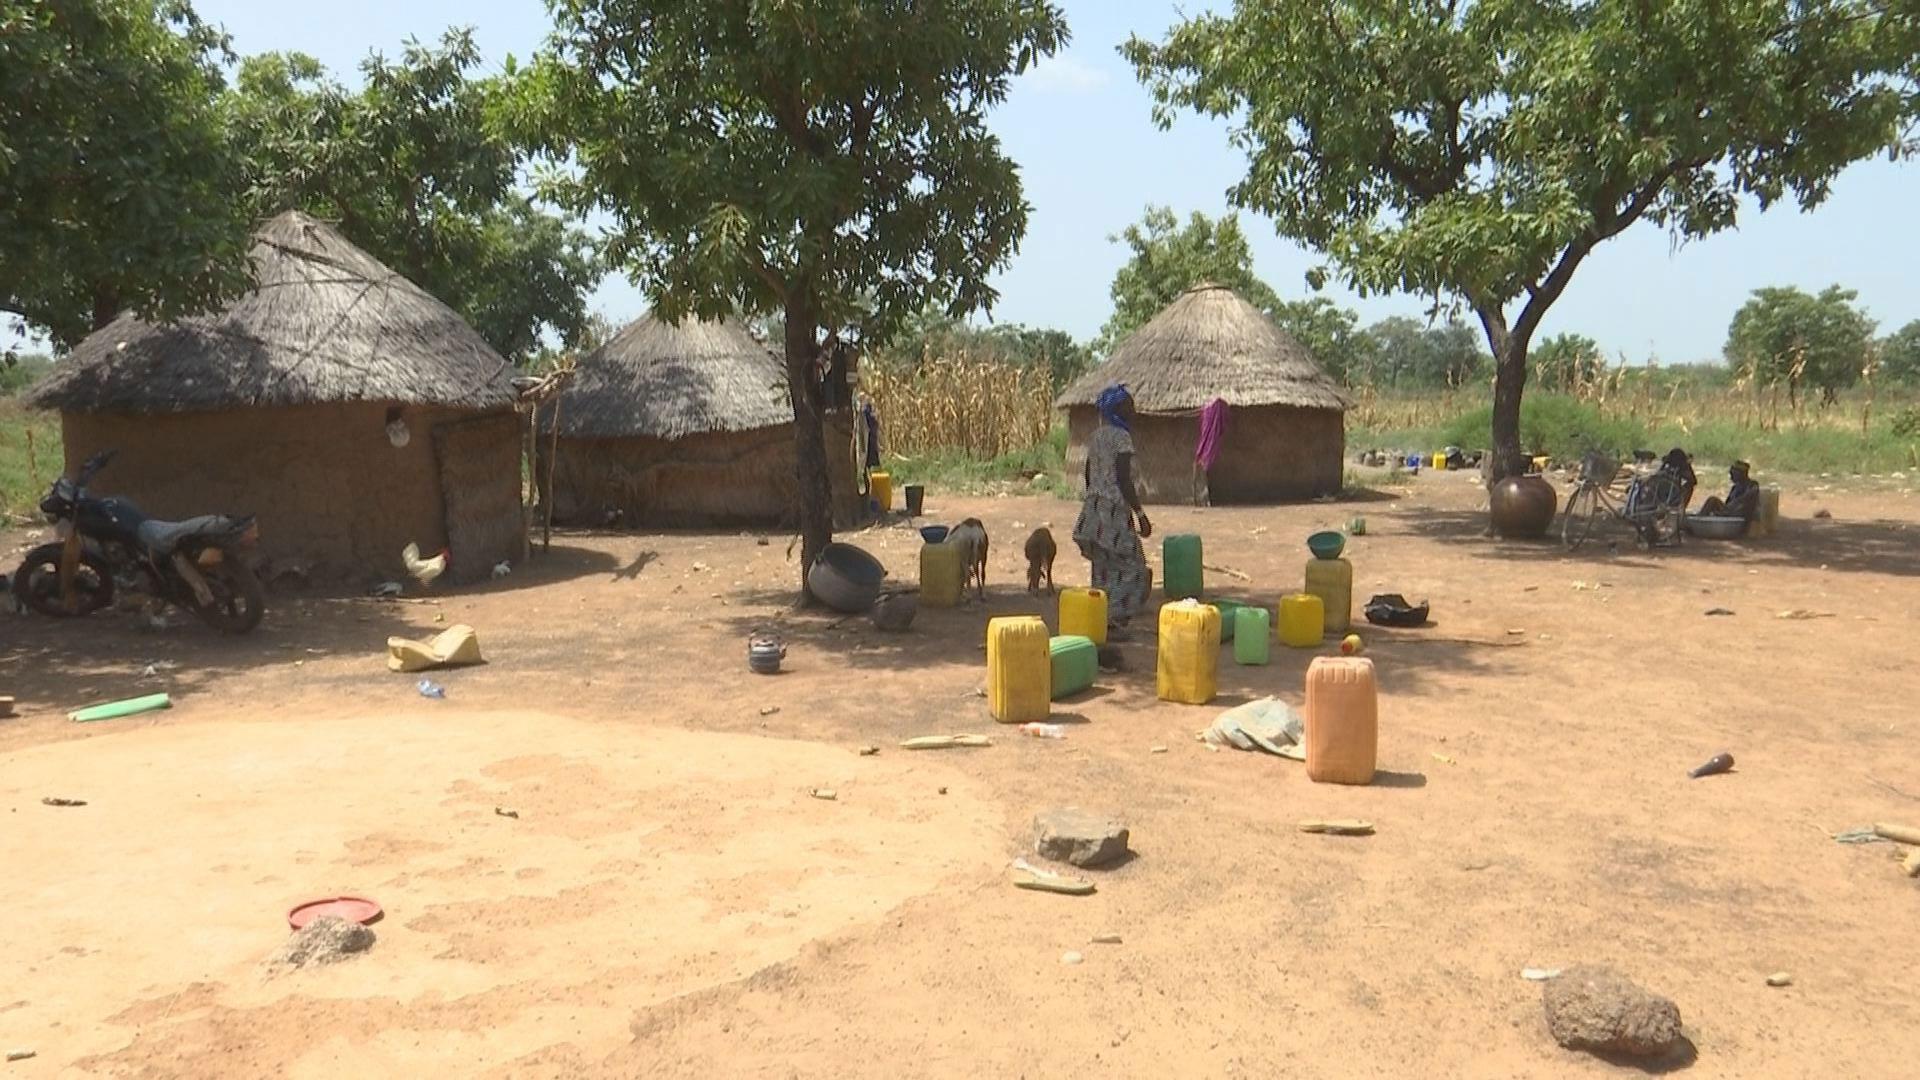 Kpinchilla, a small village in northern Ghana, reels under the impact of the climate crisis.